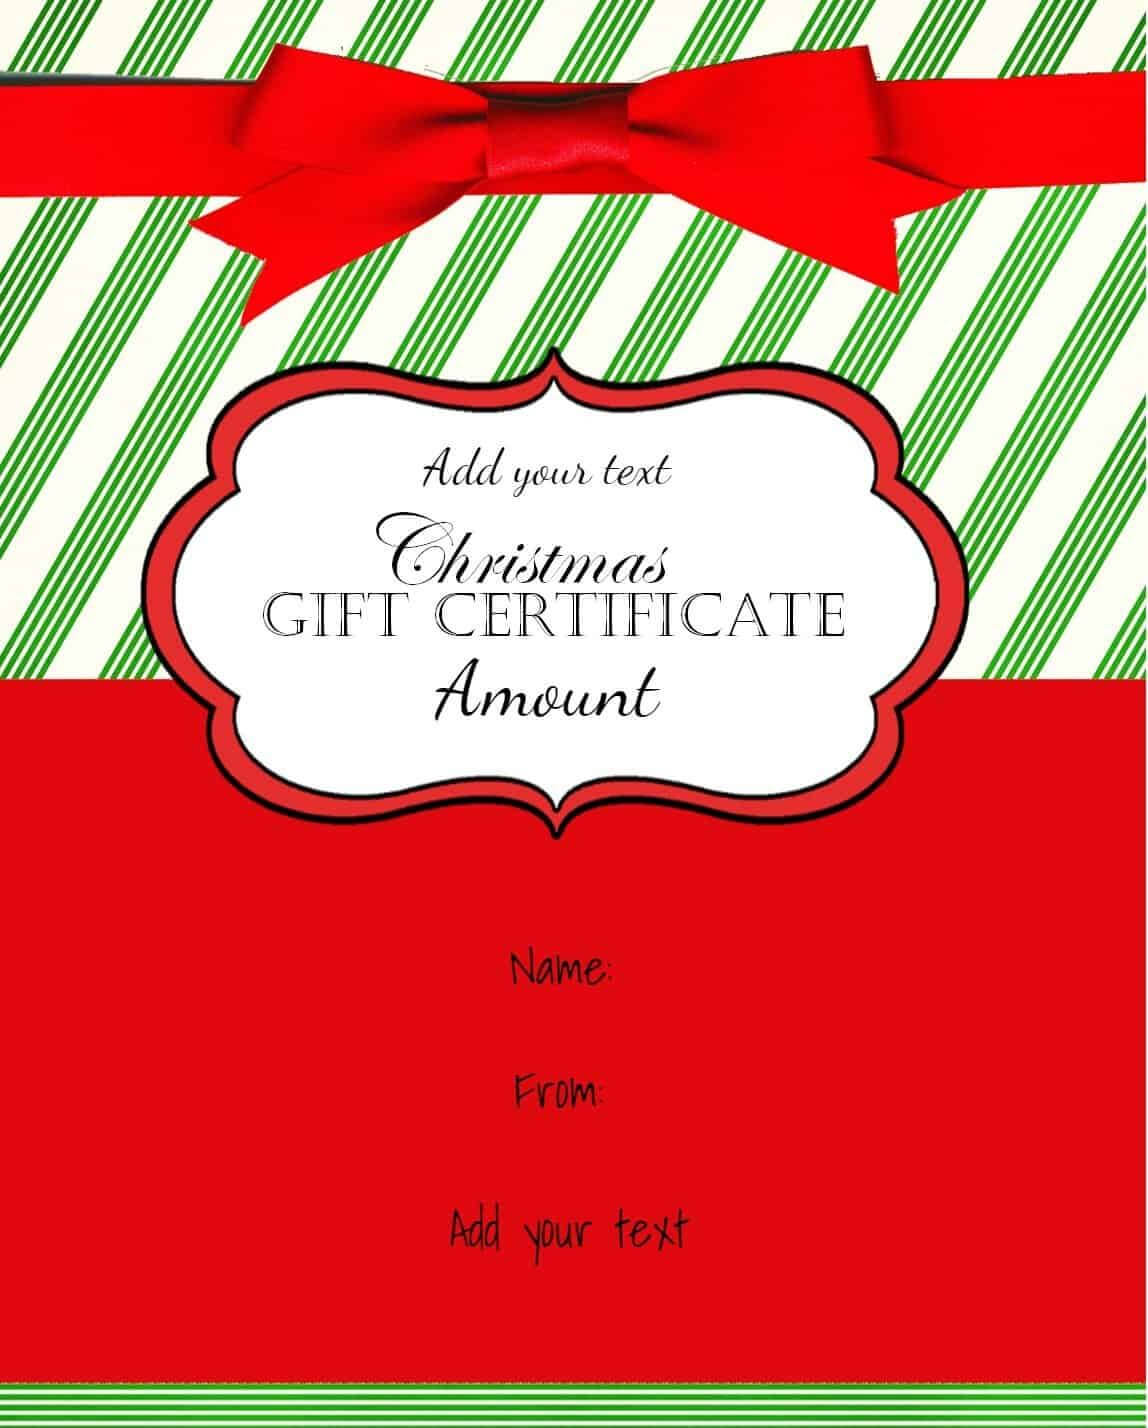 14+ New Year Gift Certificate Templates | Free Printable Within Free Christmas Gift Certificate Templates